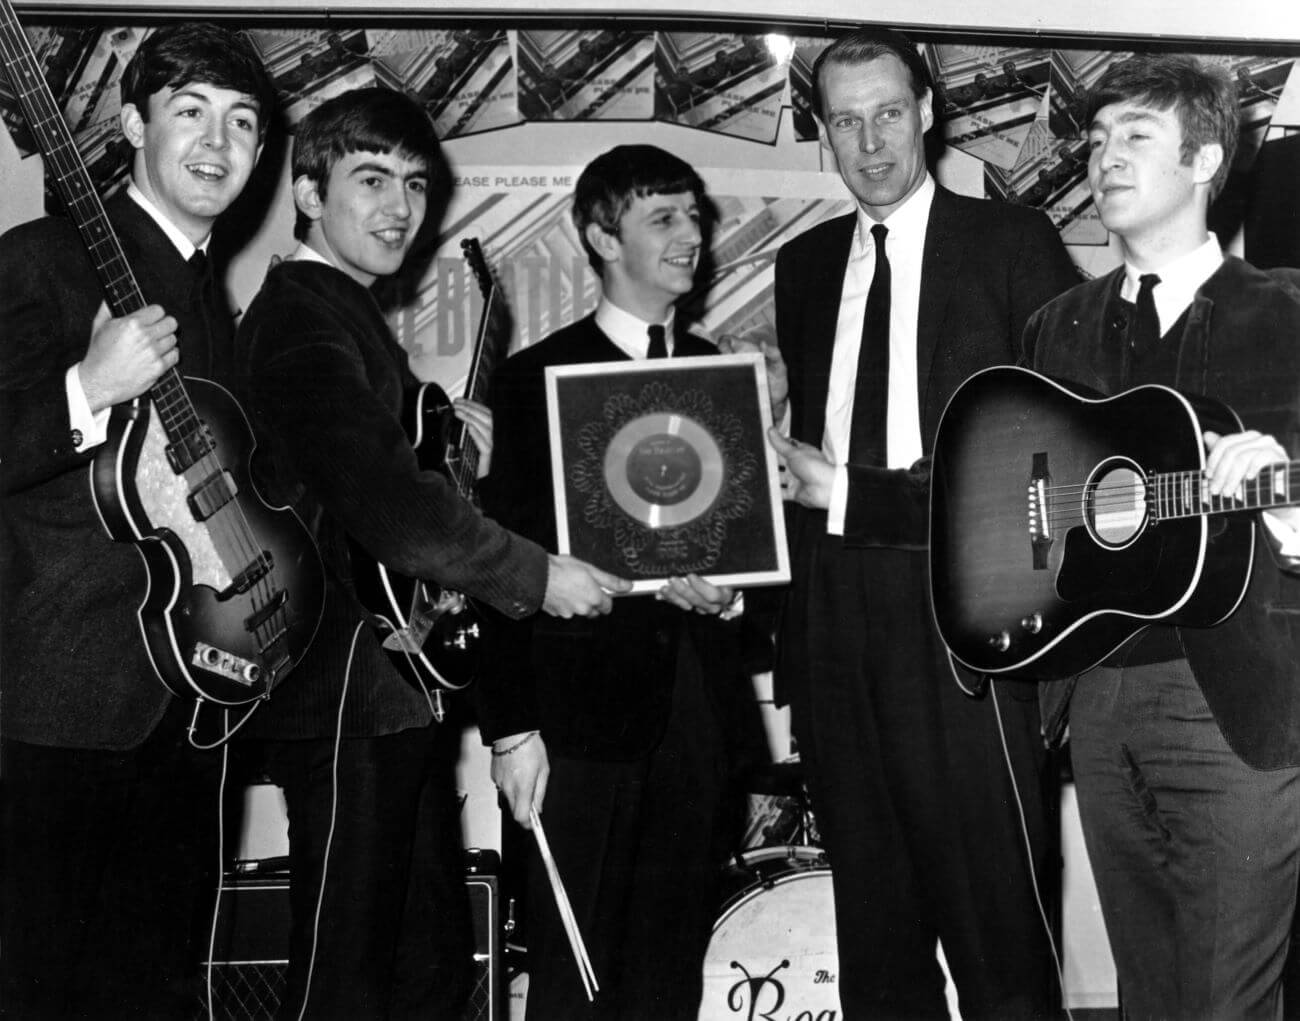 A black and white picture of Paul McCartney, George Harrison, Ringo Starr, George Martin, and John Lennon holding guitars and a record.